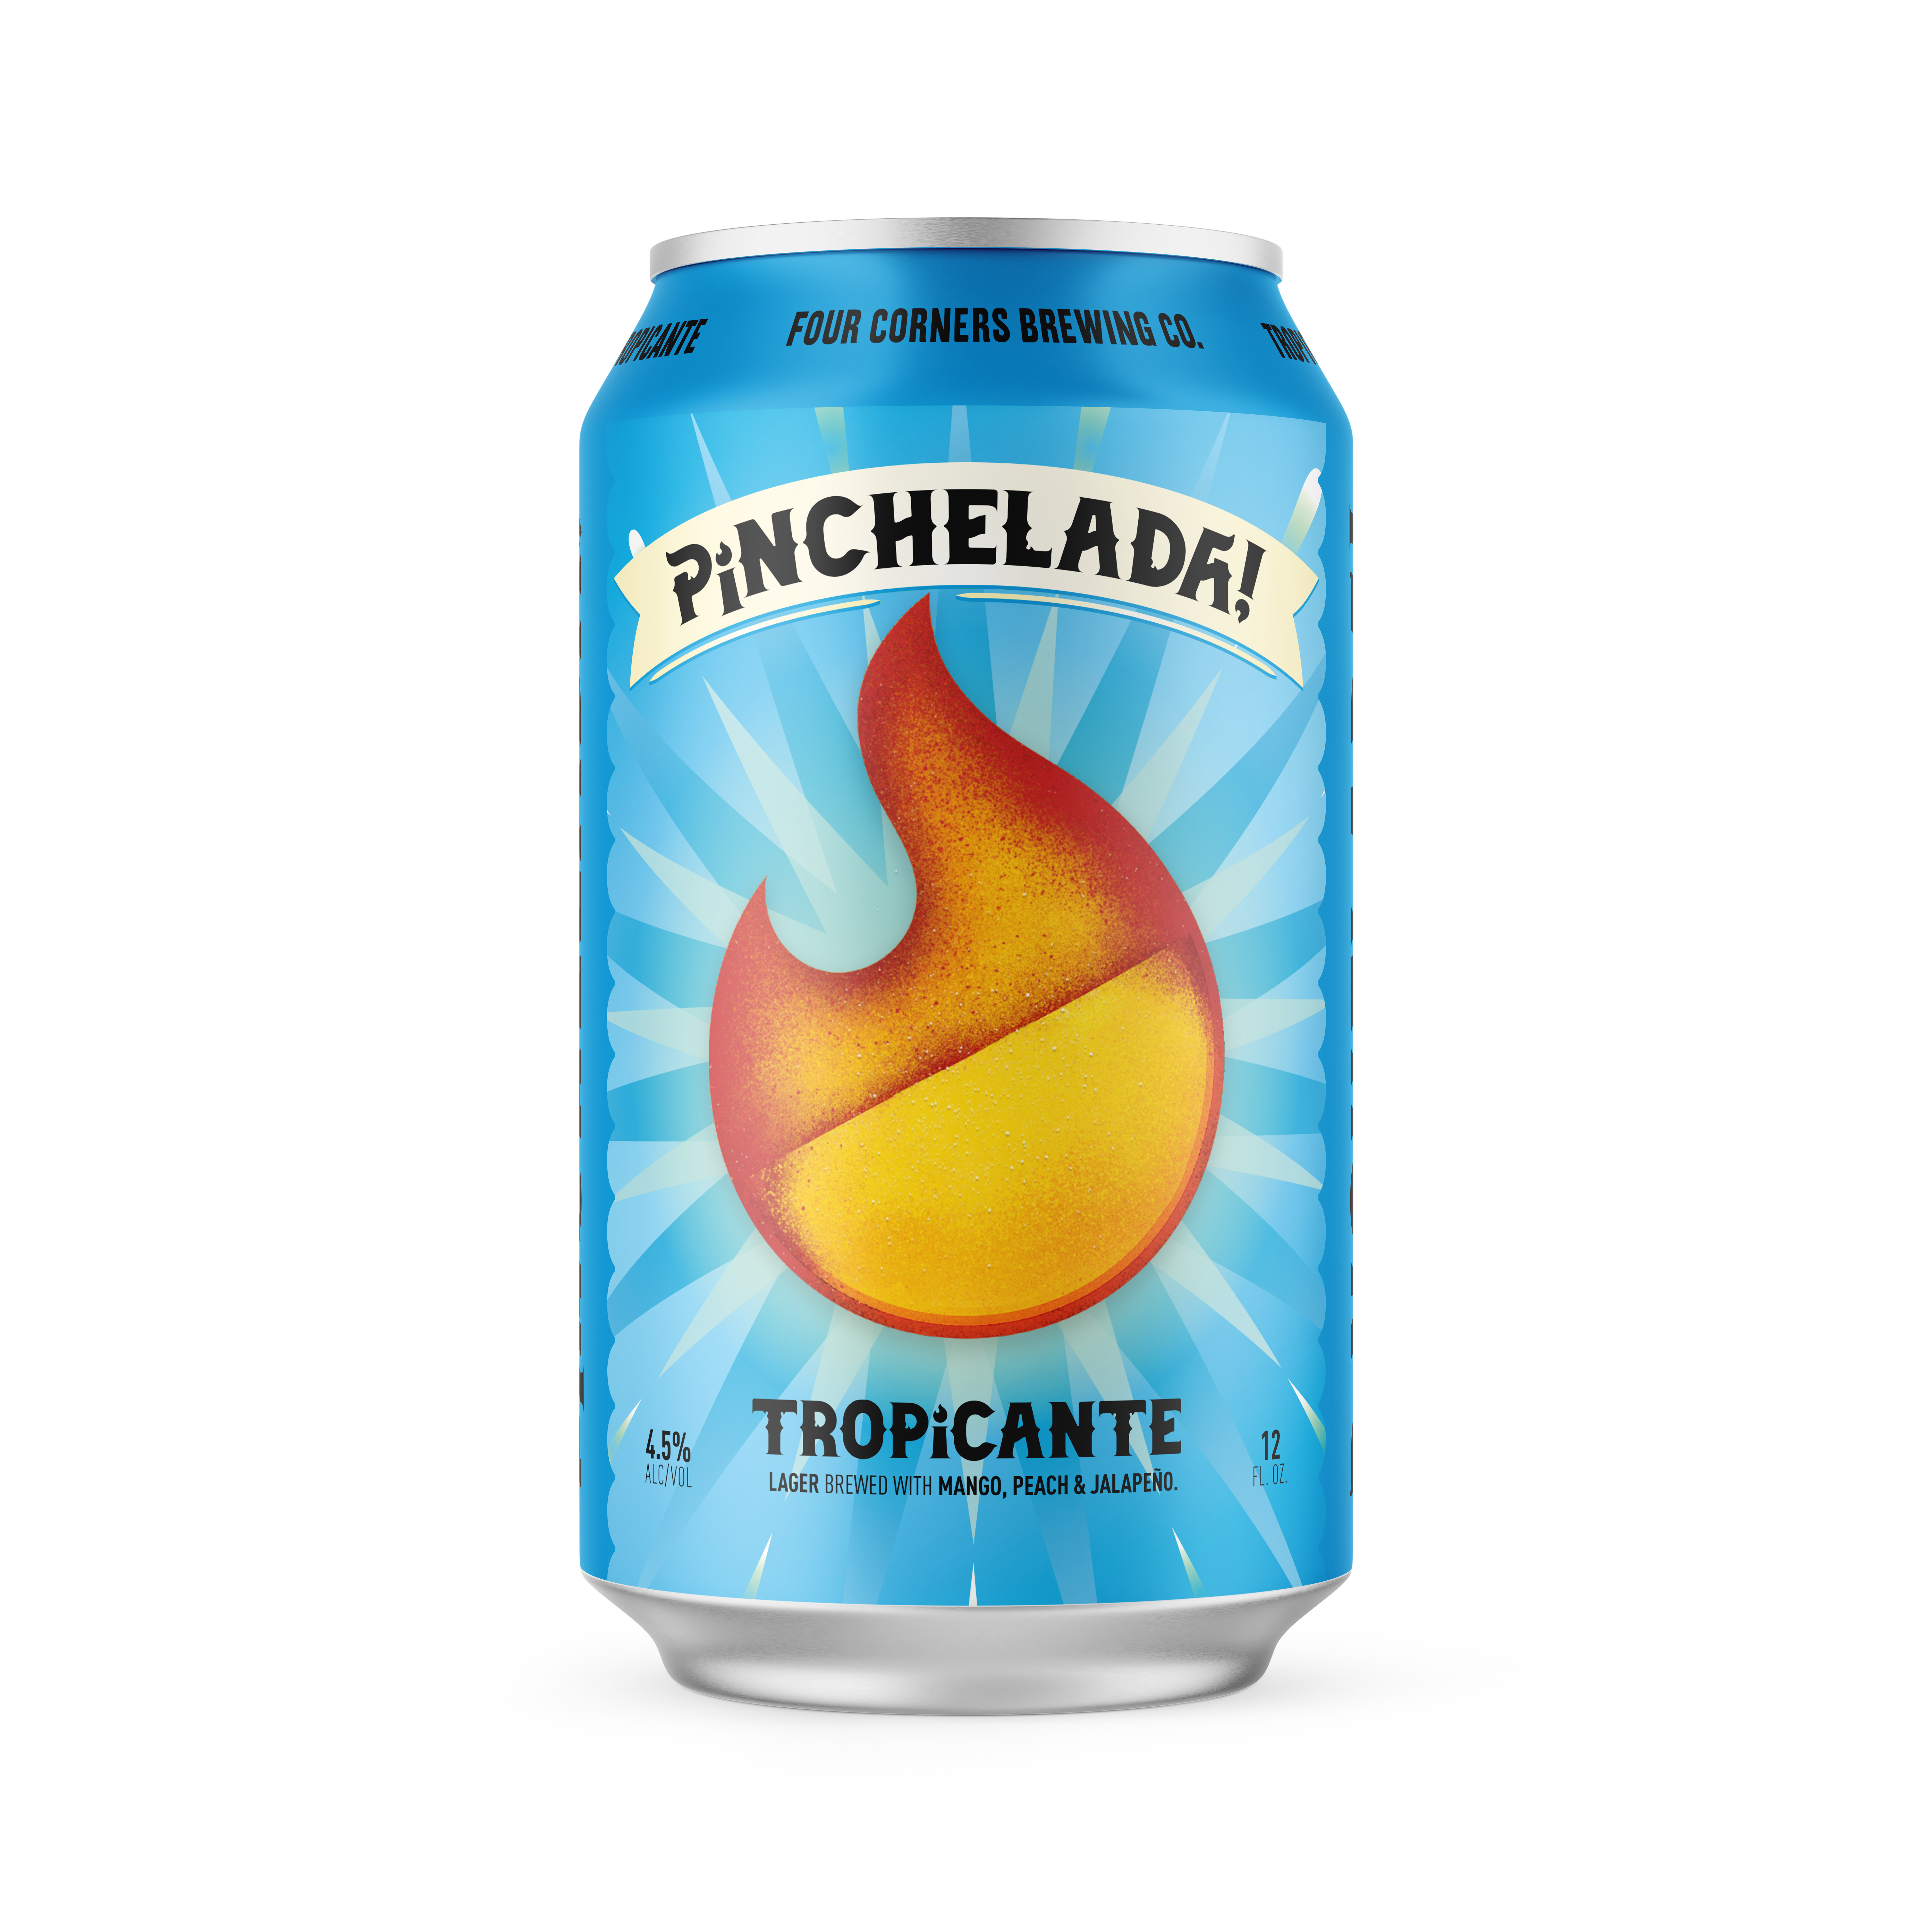 Dive into a blend of tropical flavors with this clean and crisp chelada. Balancing light malt, exotic fruit flavors, and a zesty finish, Tropicante delivers a refreshing burst of flavor with every sip!